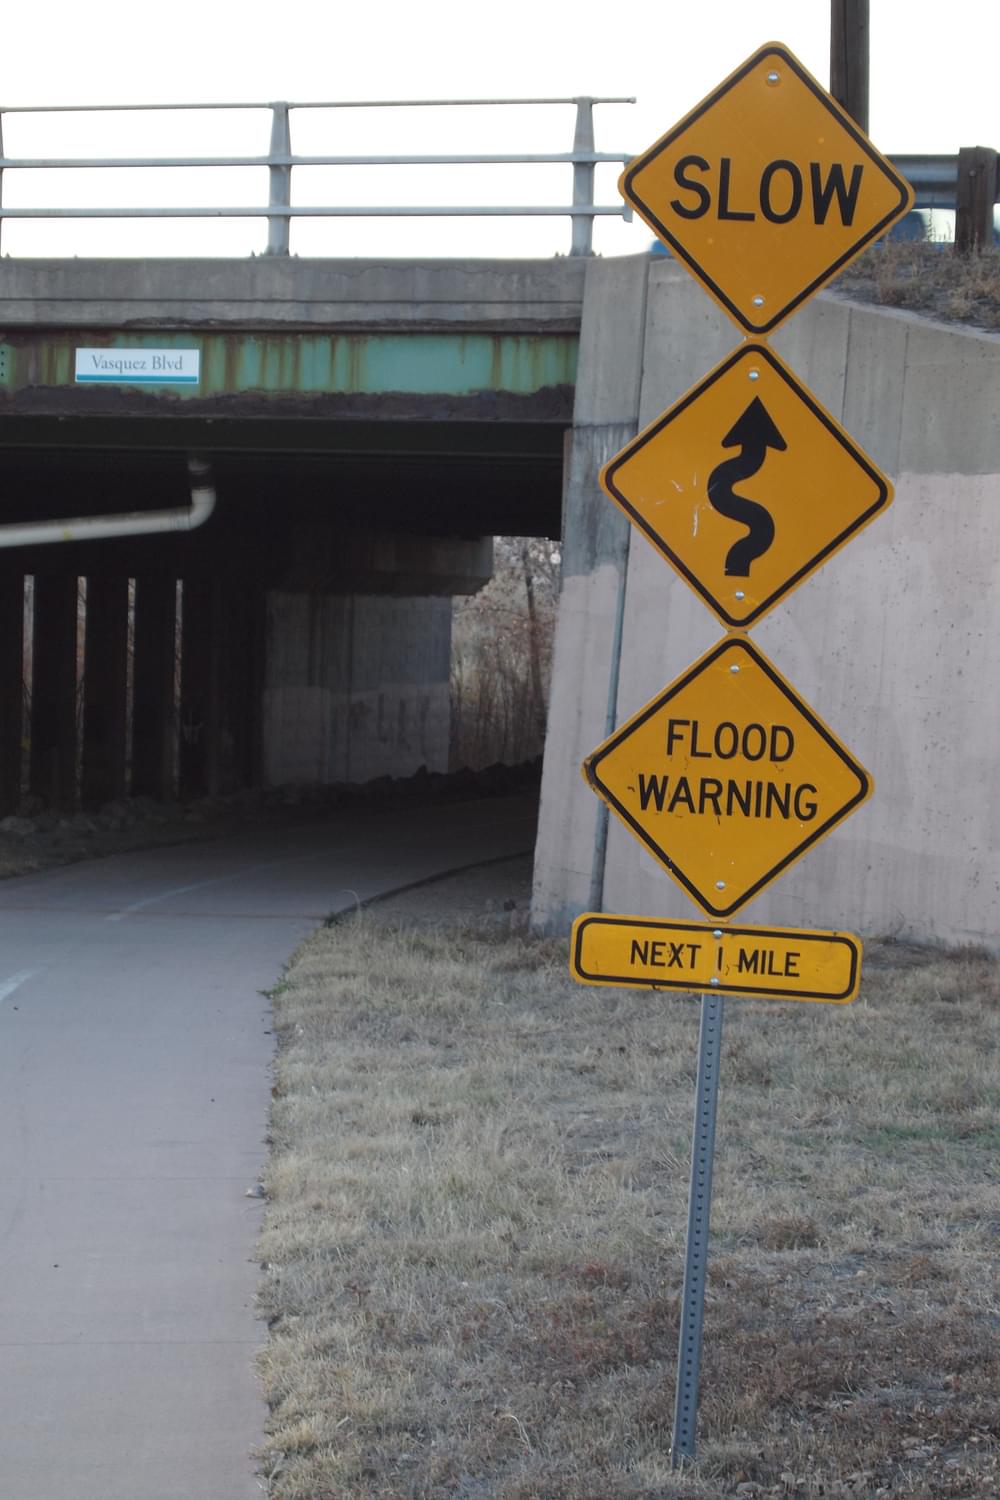 Watch for possible flooding over the next mile, as well as general caution signs; Sand Creek Greenway, Commerce City, Colorado